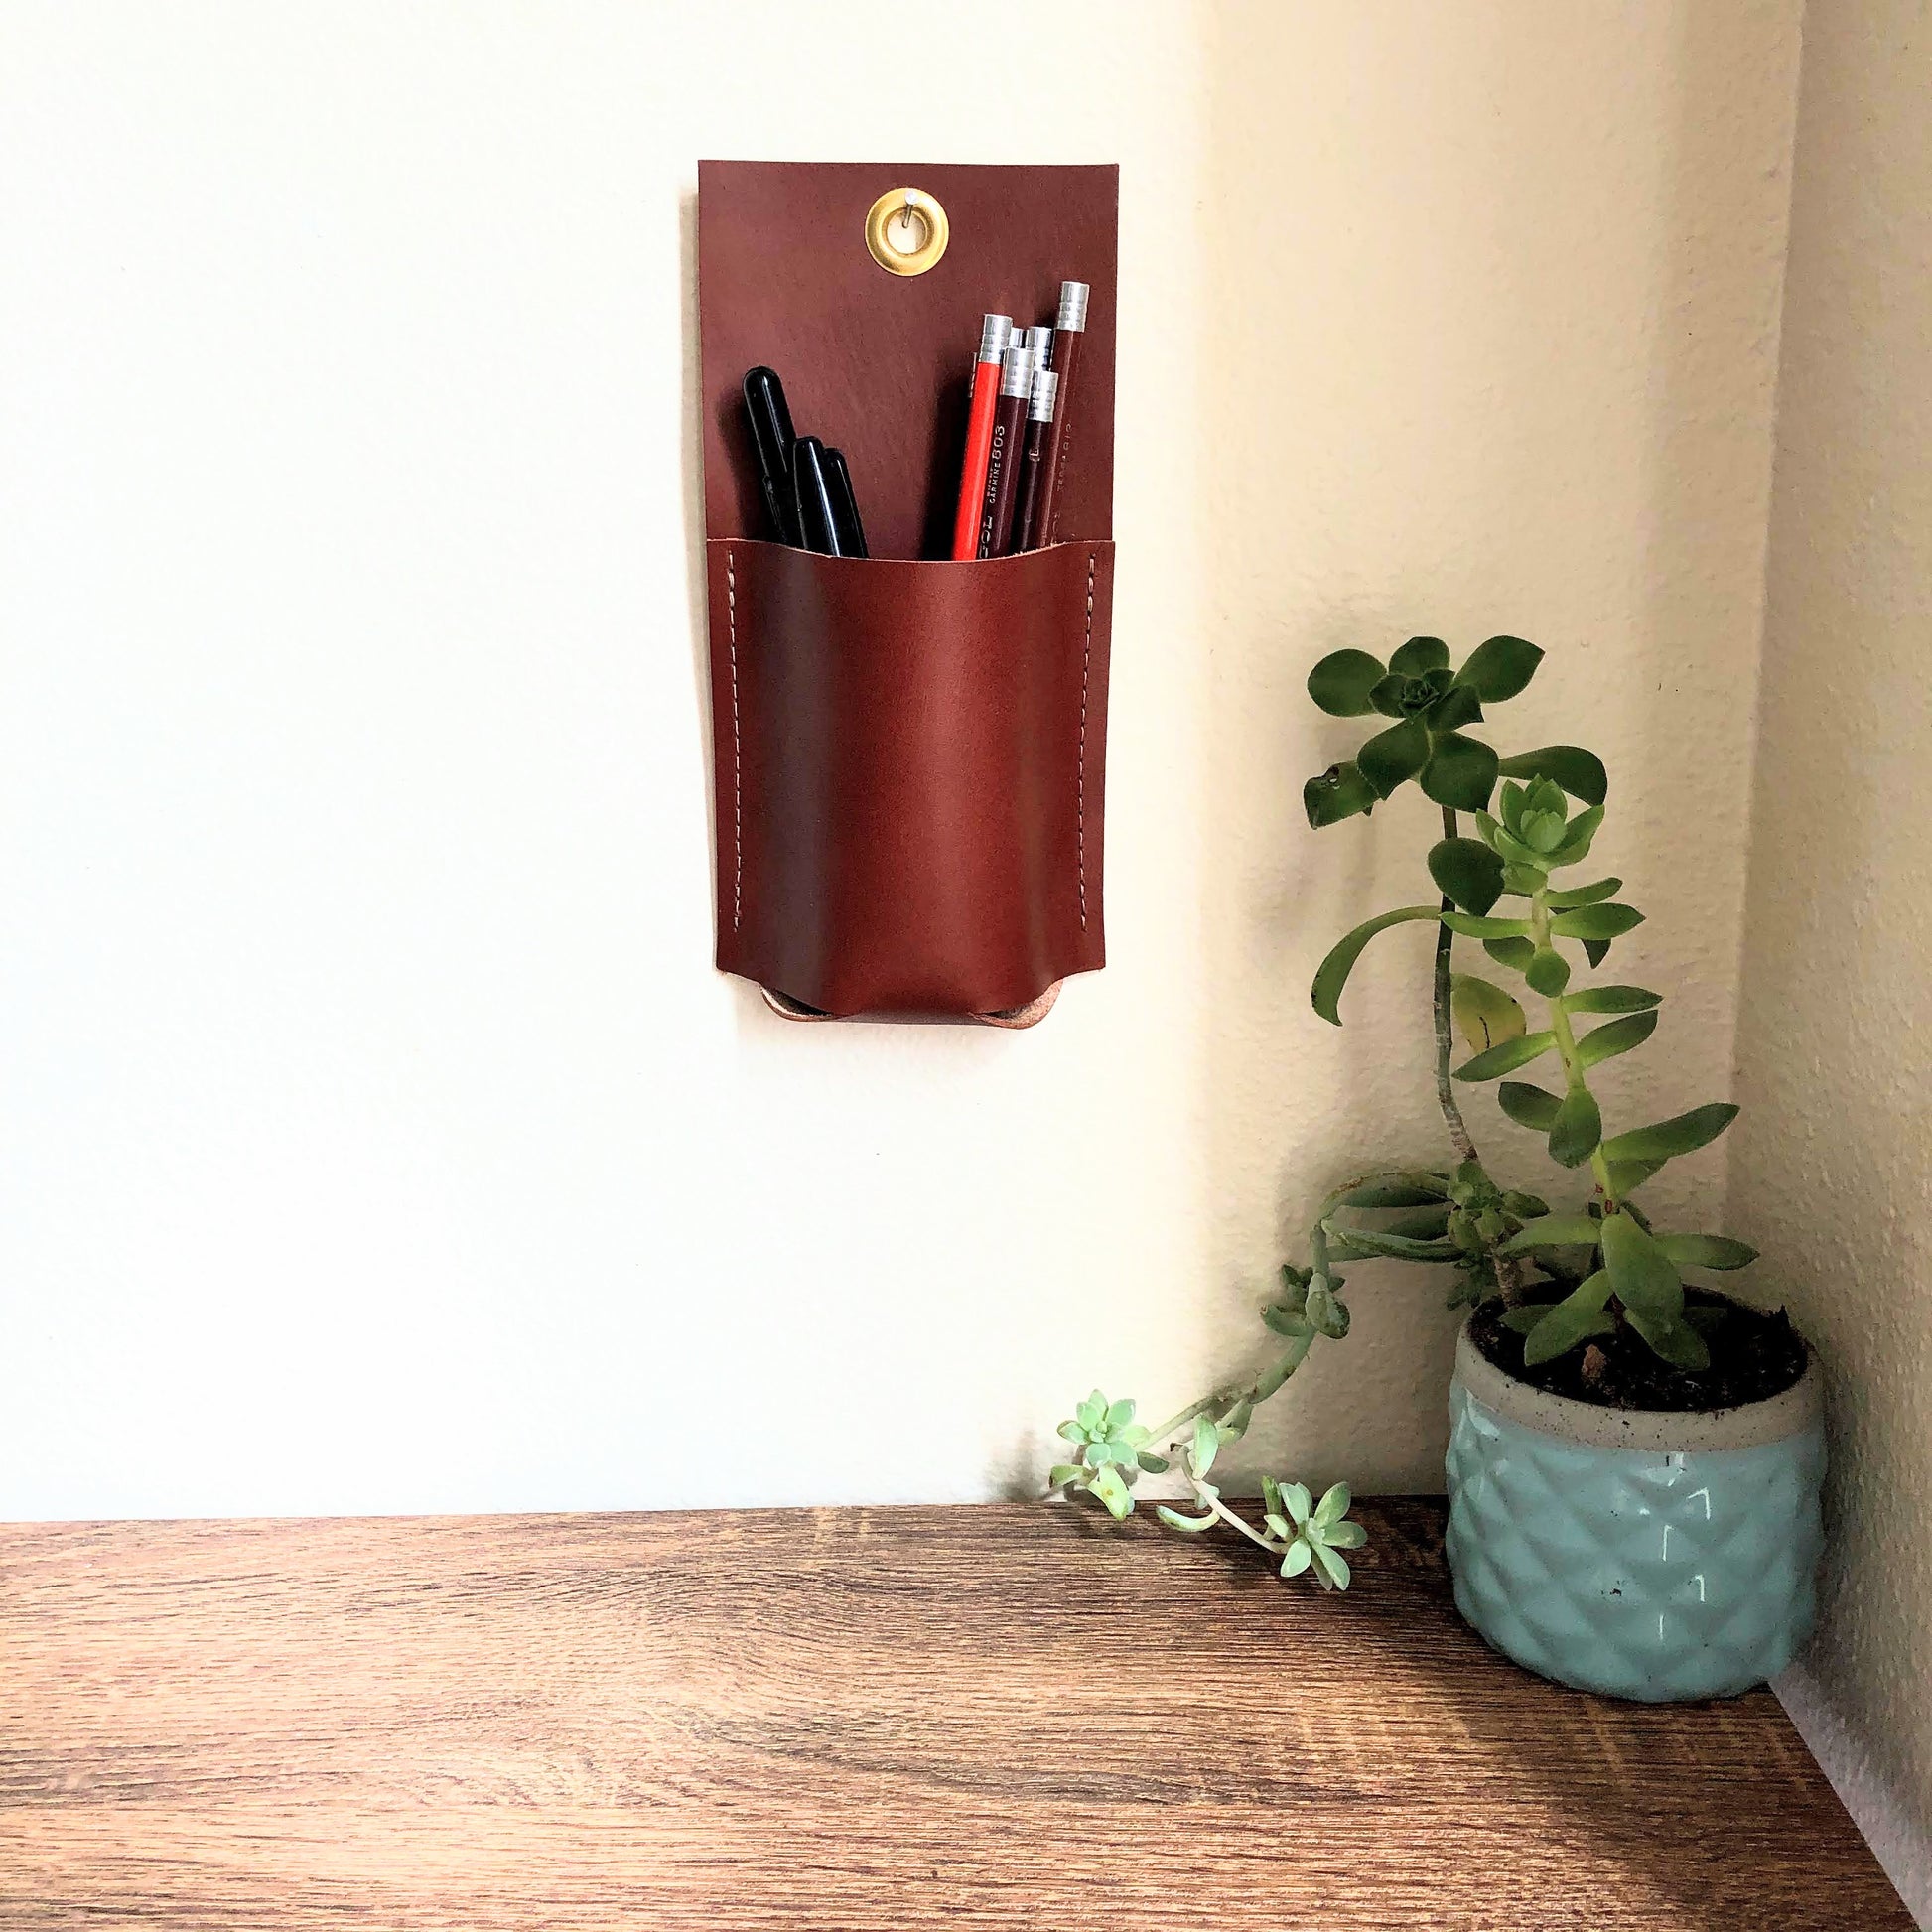 Small brown leather wall caddy holds an assortment of colorful pencils near an entry table.